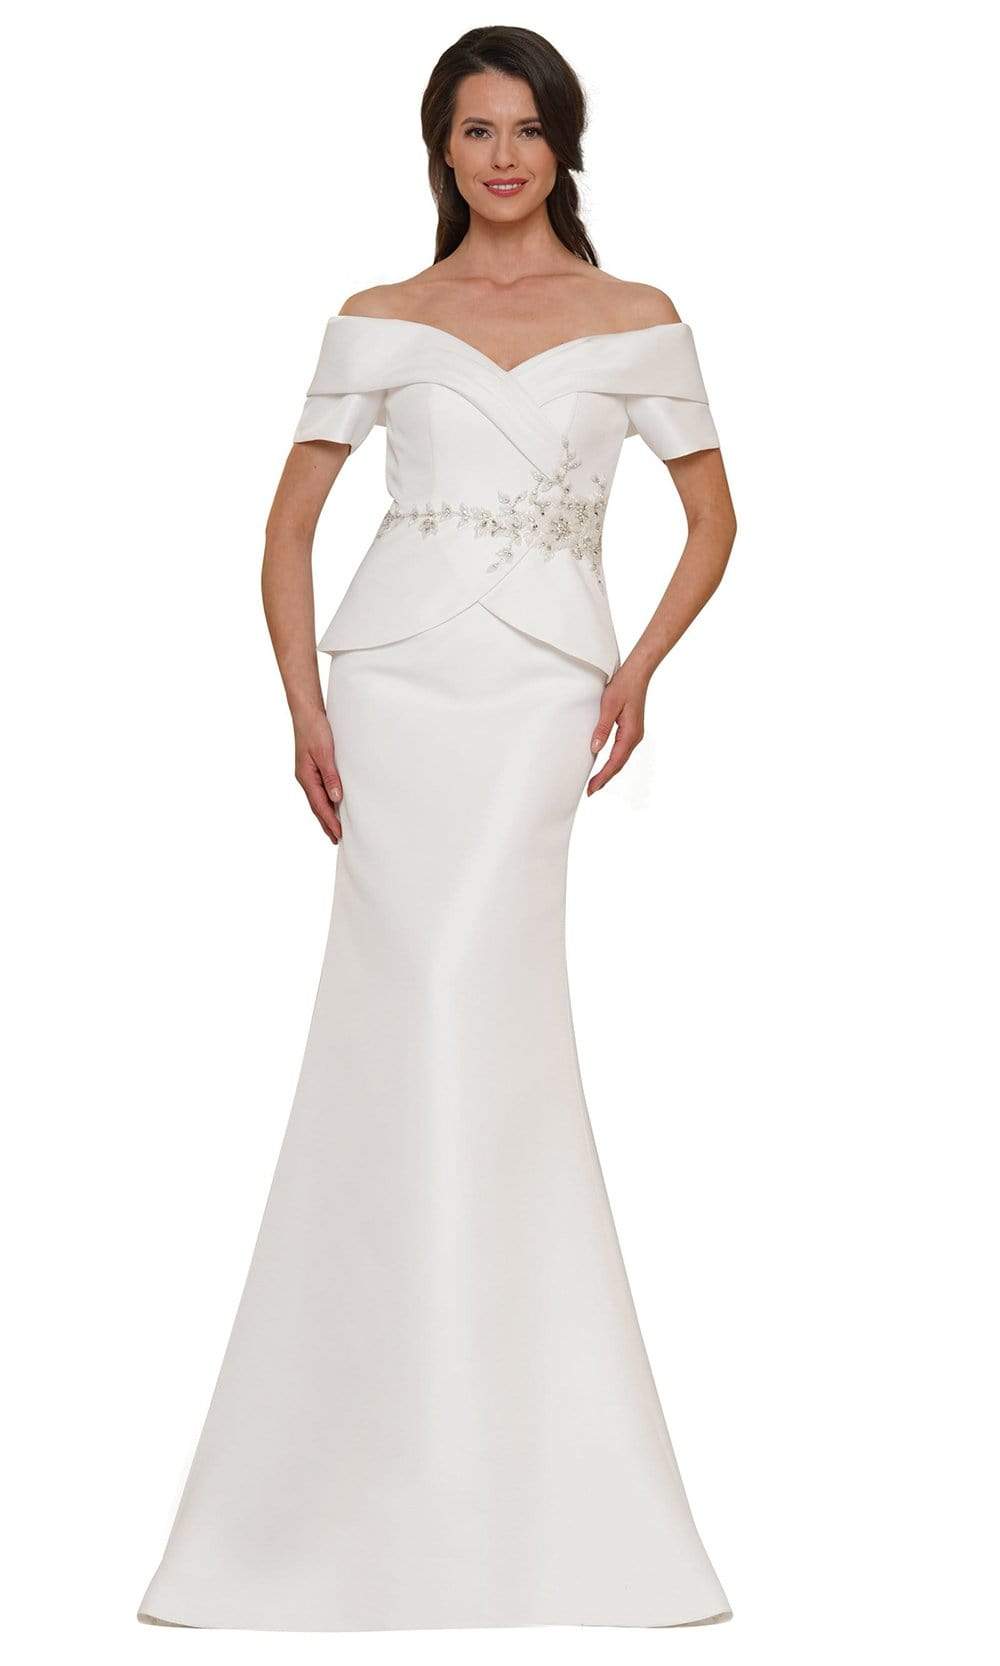 Marsoni by Colors - MV1144 Peplum Trumpet Evening Dress Mother of the Bride Dresses 4 / Off White